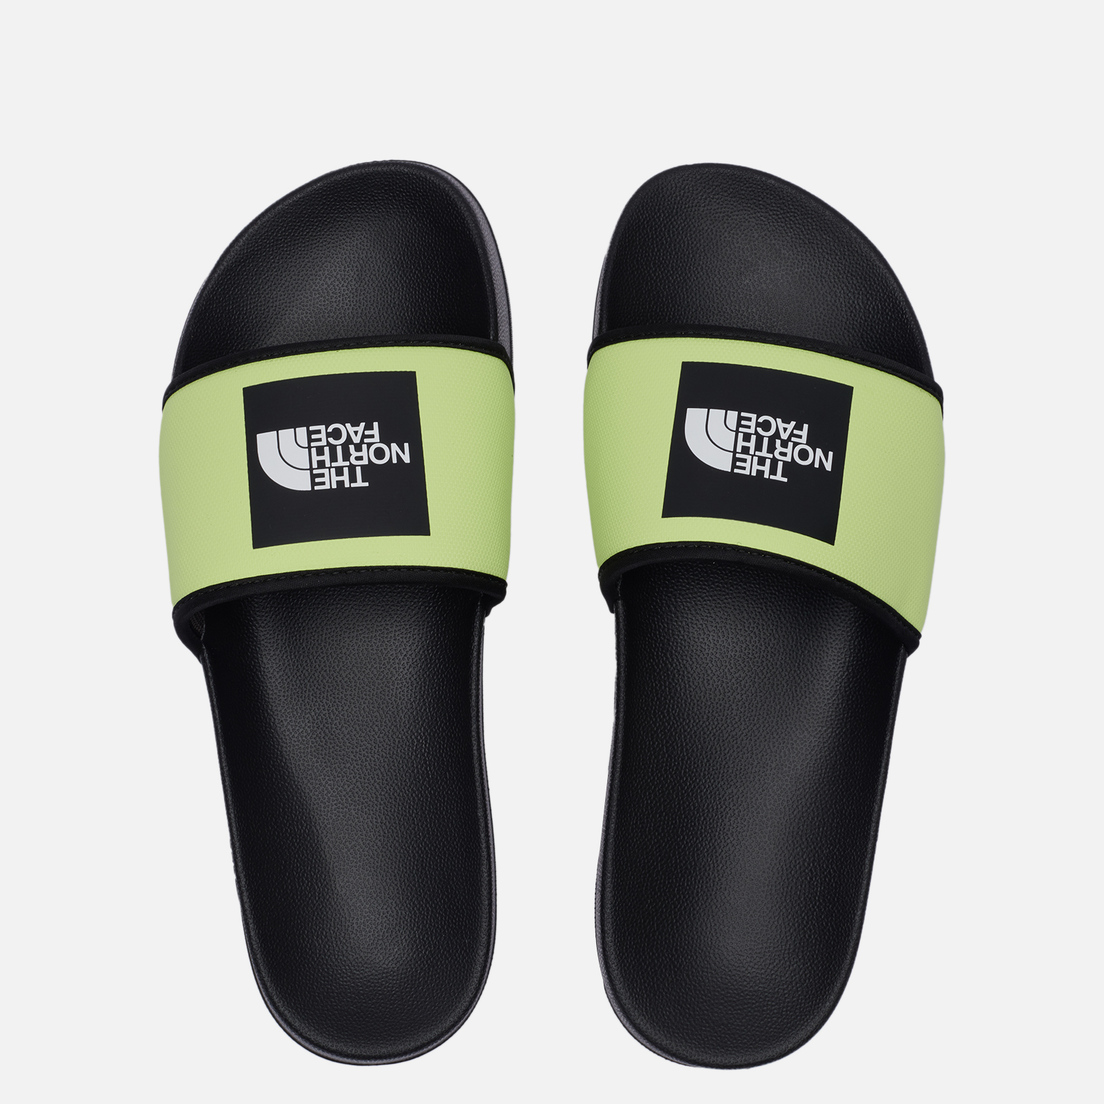 The North Face Мужские сланцы Base Camp Slide III